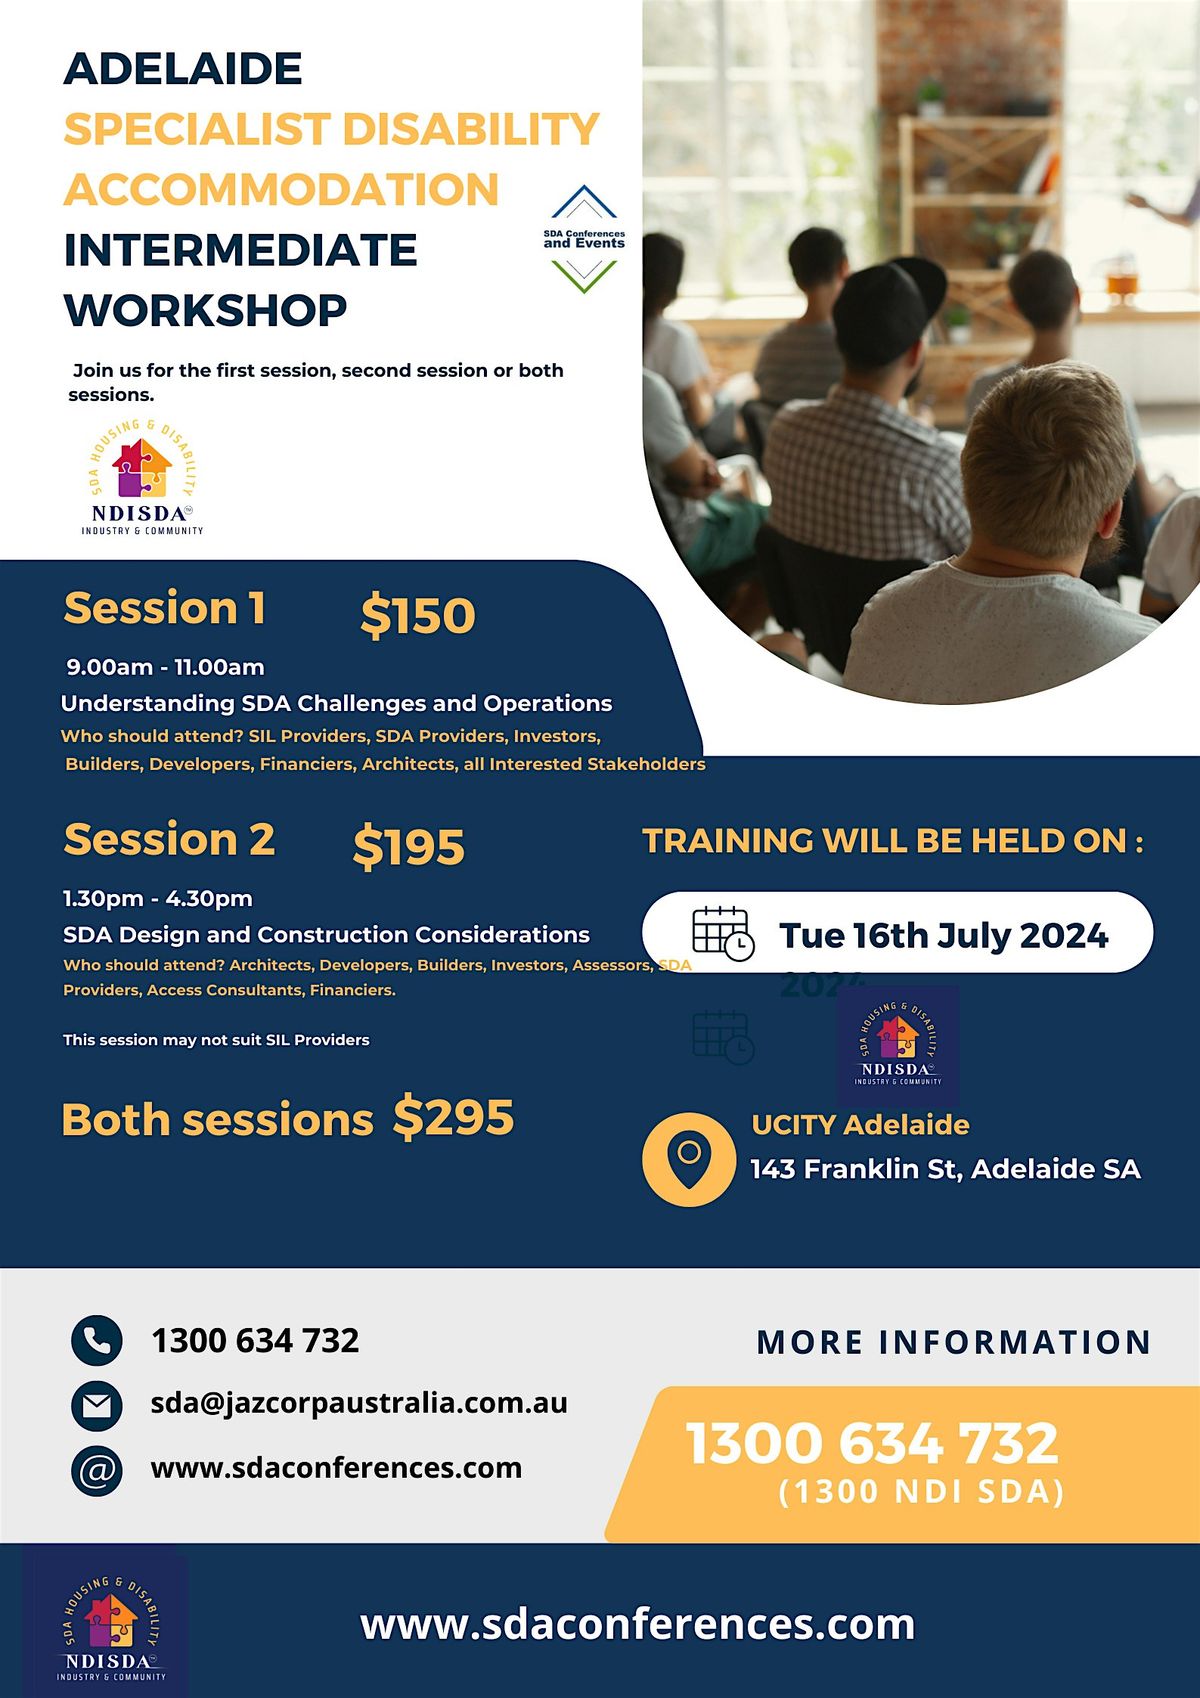 Adelaide Specialist Disability Accommodation Intermediate Workshop